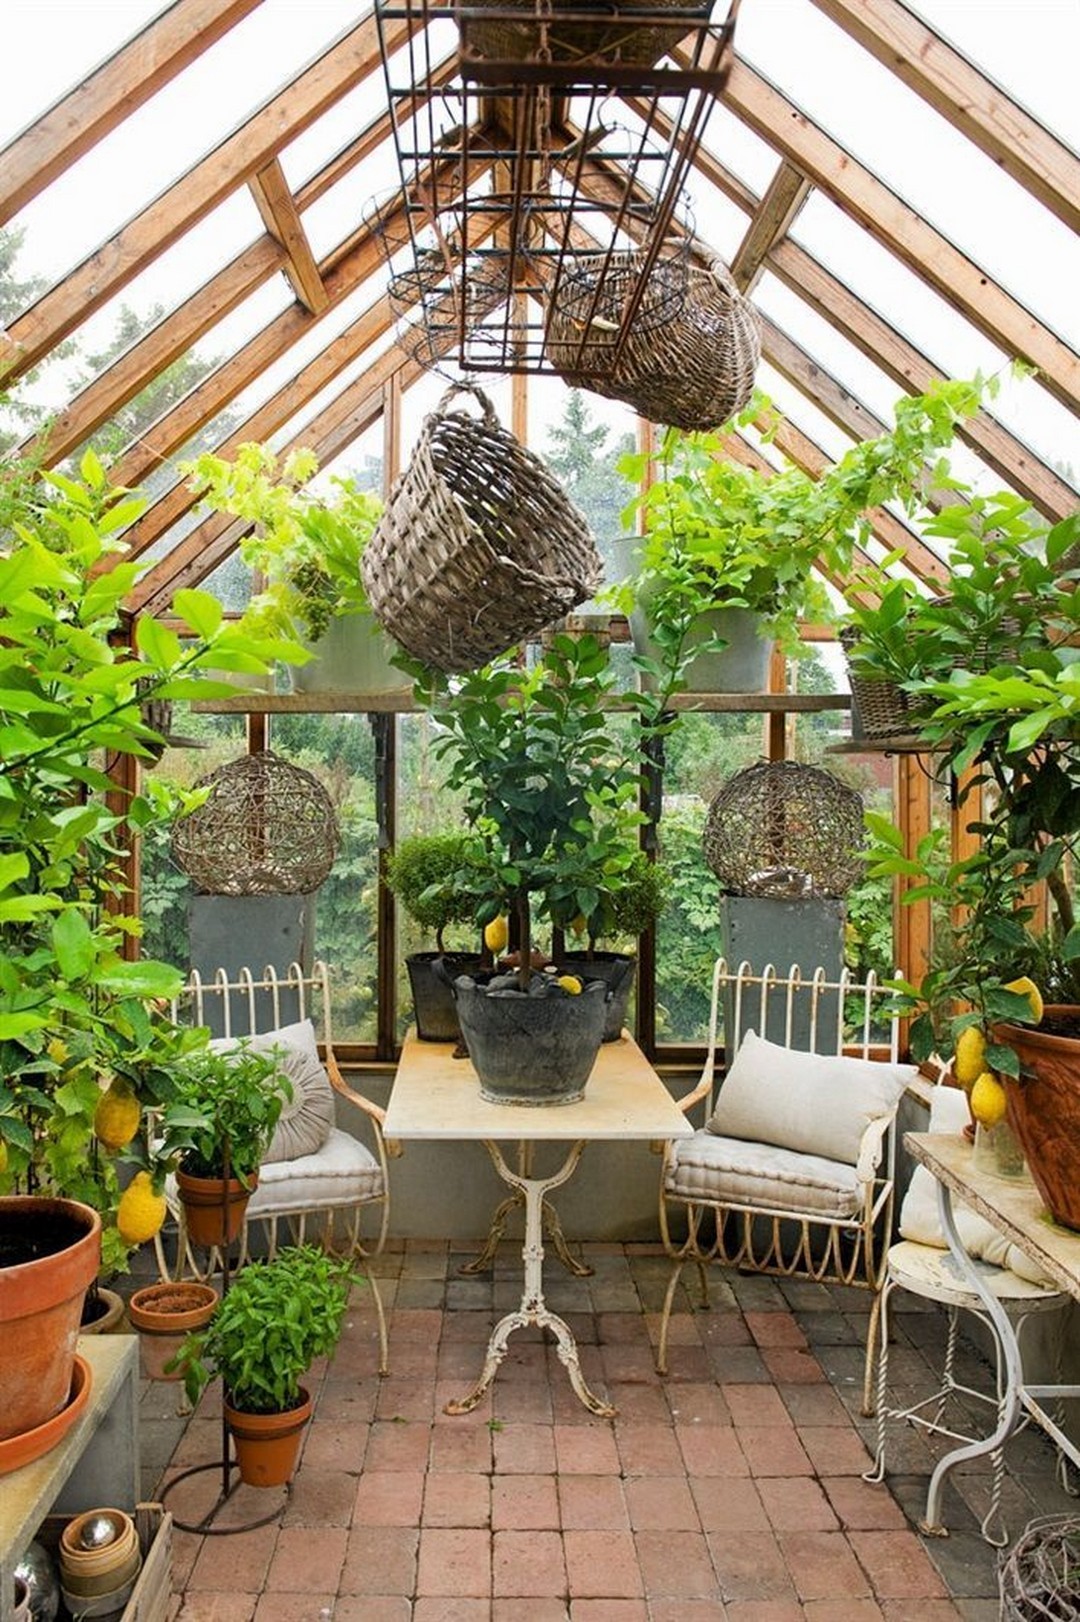 greenhouse indoor garden interior decor small luxury interiors houses backyard shed sheds green greenhouses conservatory designs potting trendiest stunning look